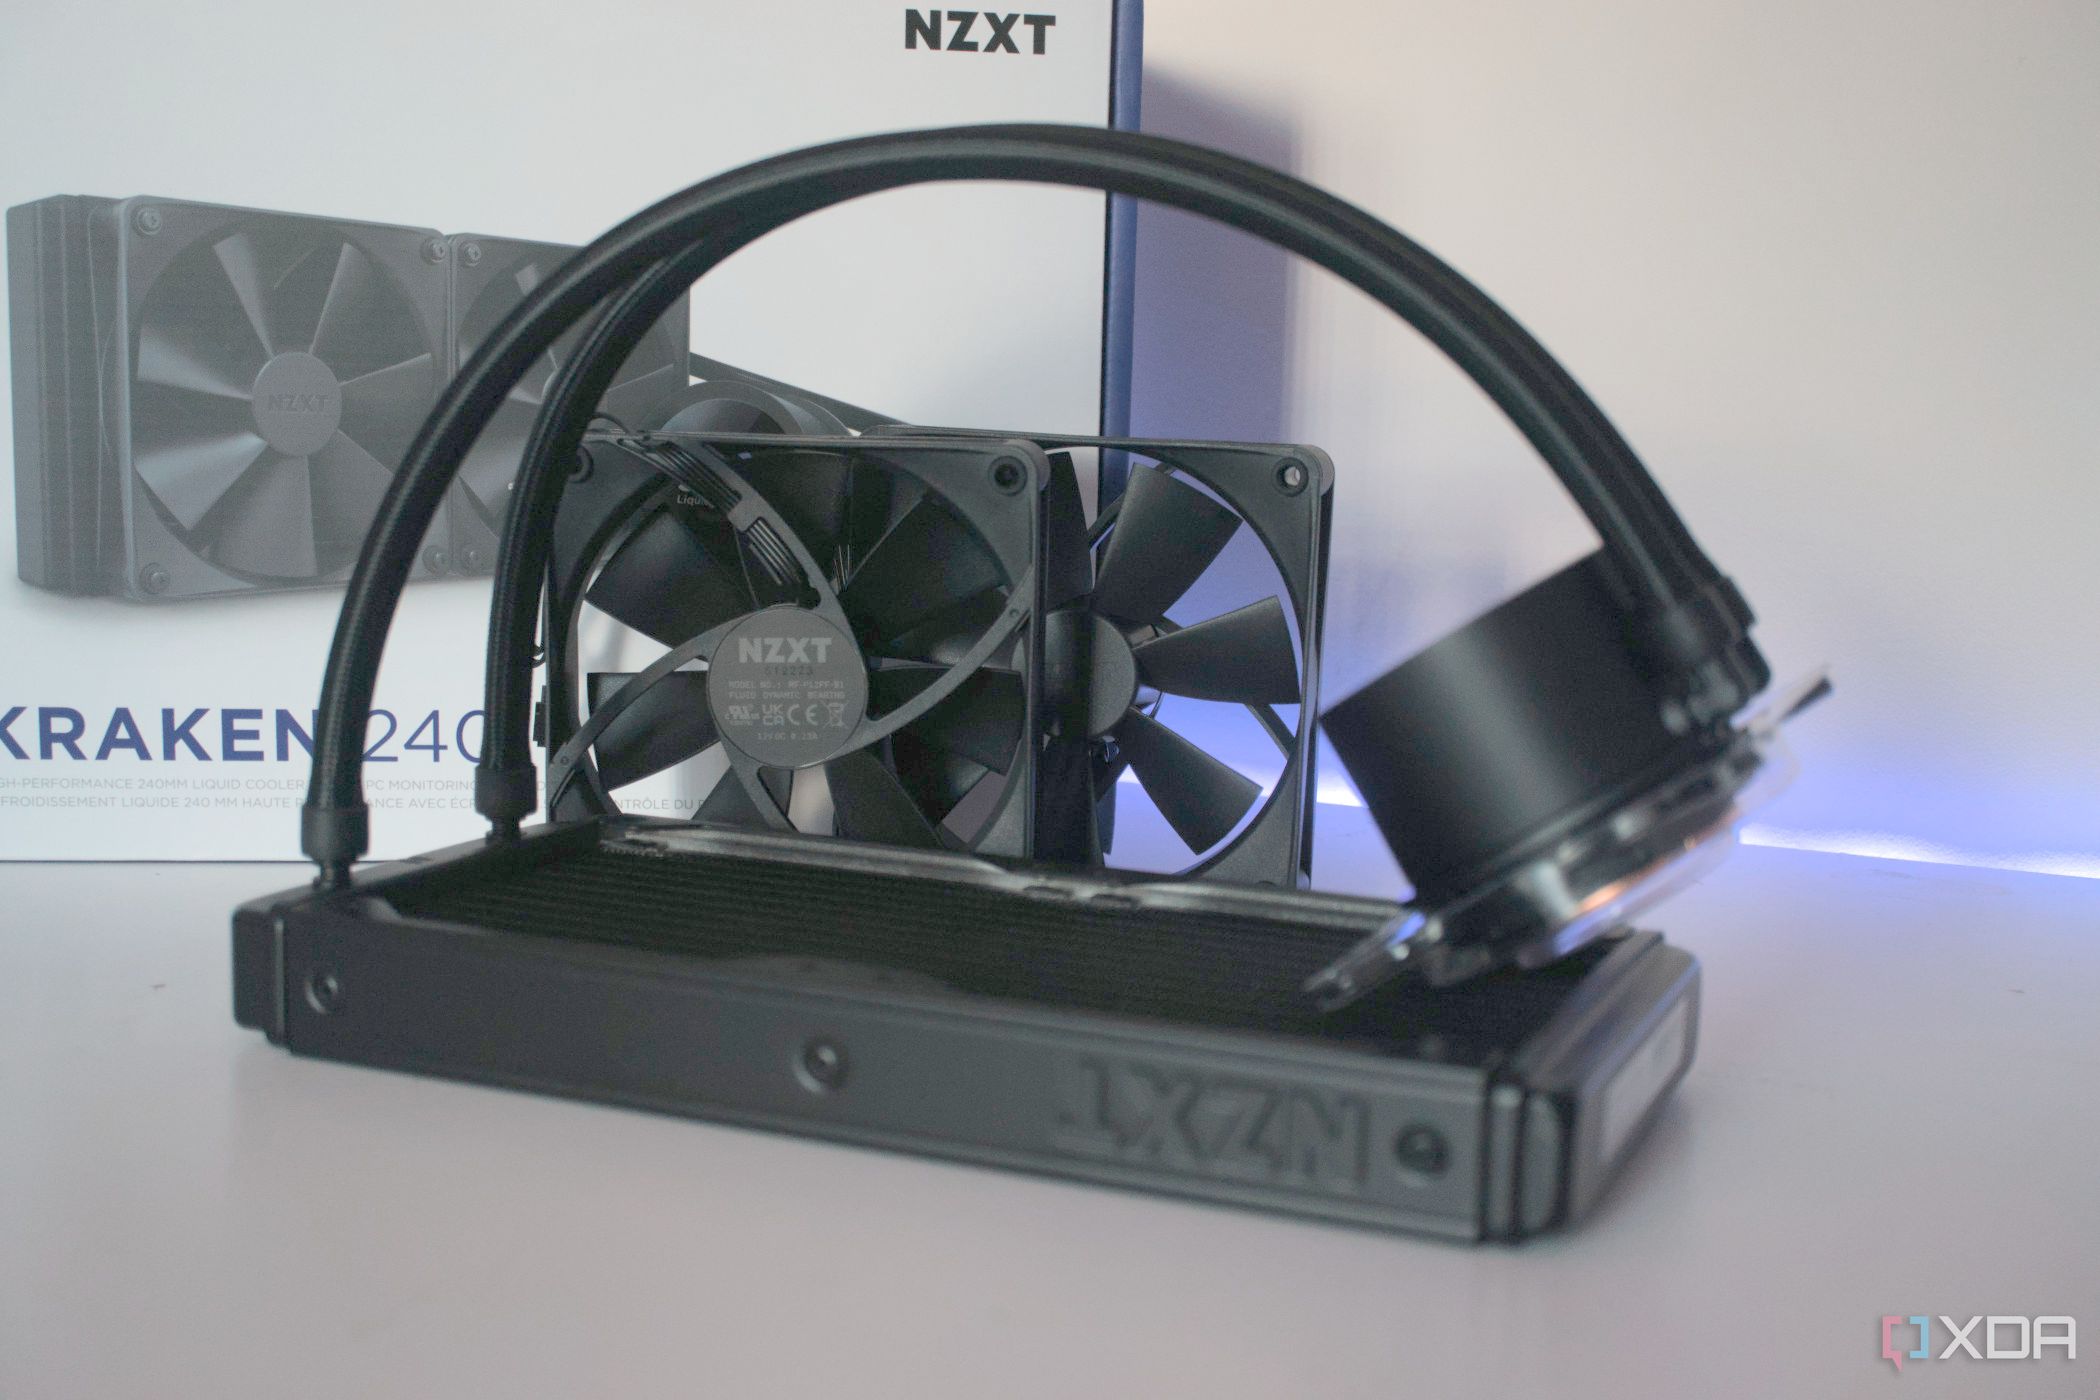 reasonable at 240 performance NZXT a price review: cooling Kraken Impressive